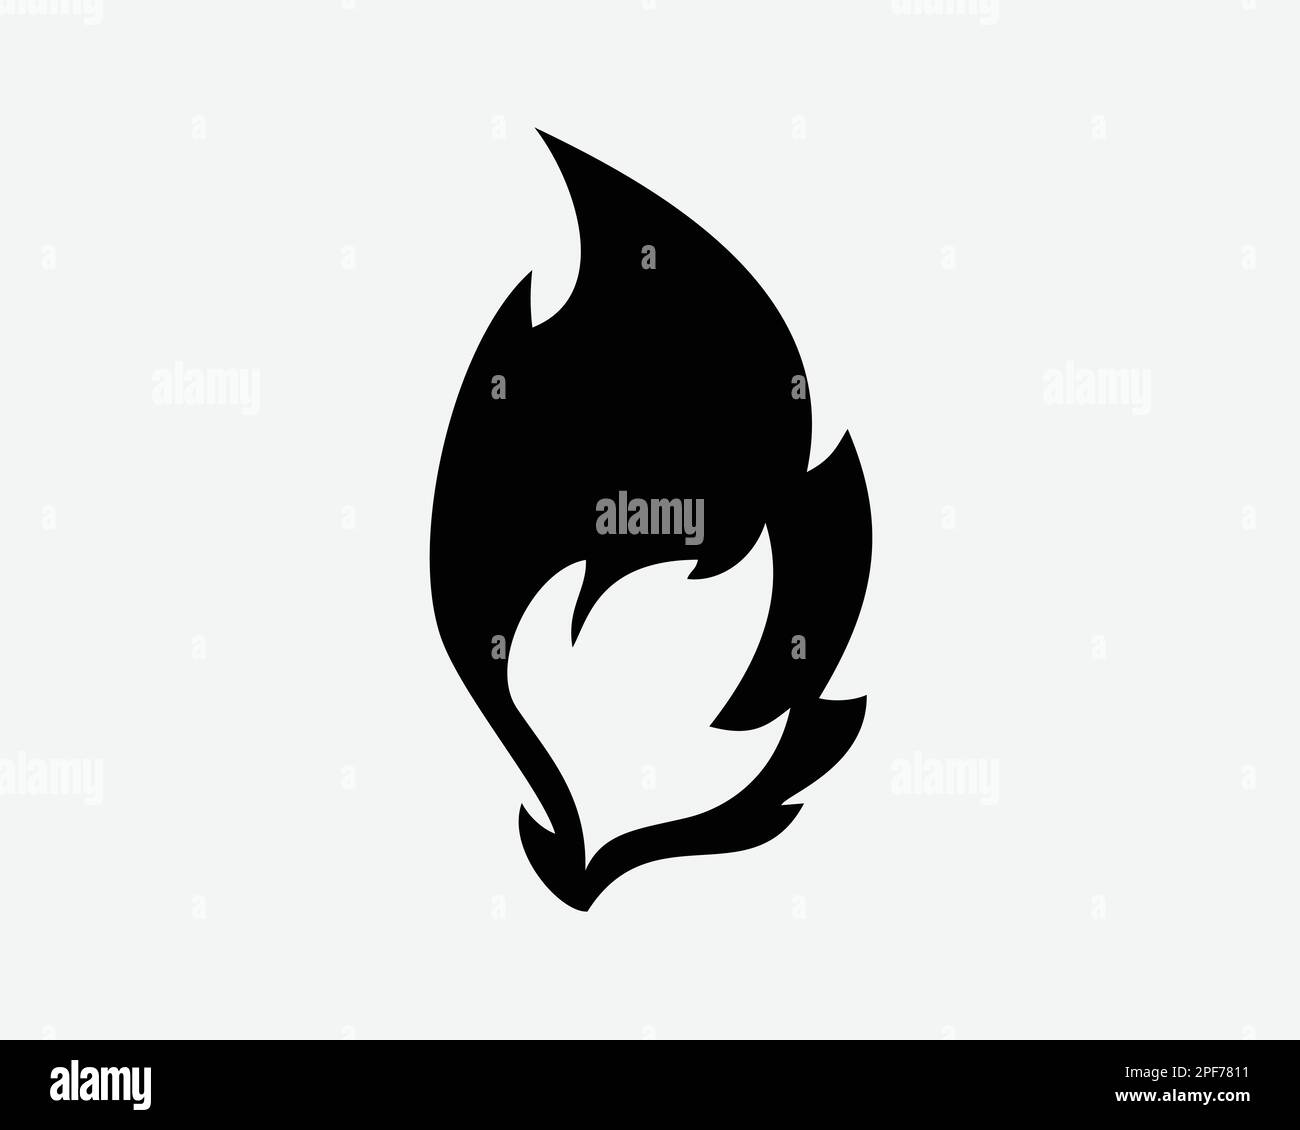 Fire Flame Burn Burning Light Camp Campfire Hot Flammable Black White Silhouette Symbol Icon Sign Graphic Clipart Artwork Illustration Pictogram Vecto Stock Vector